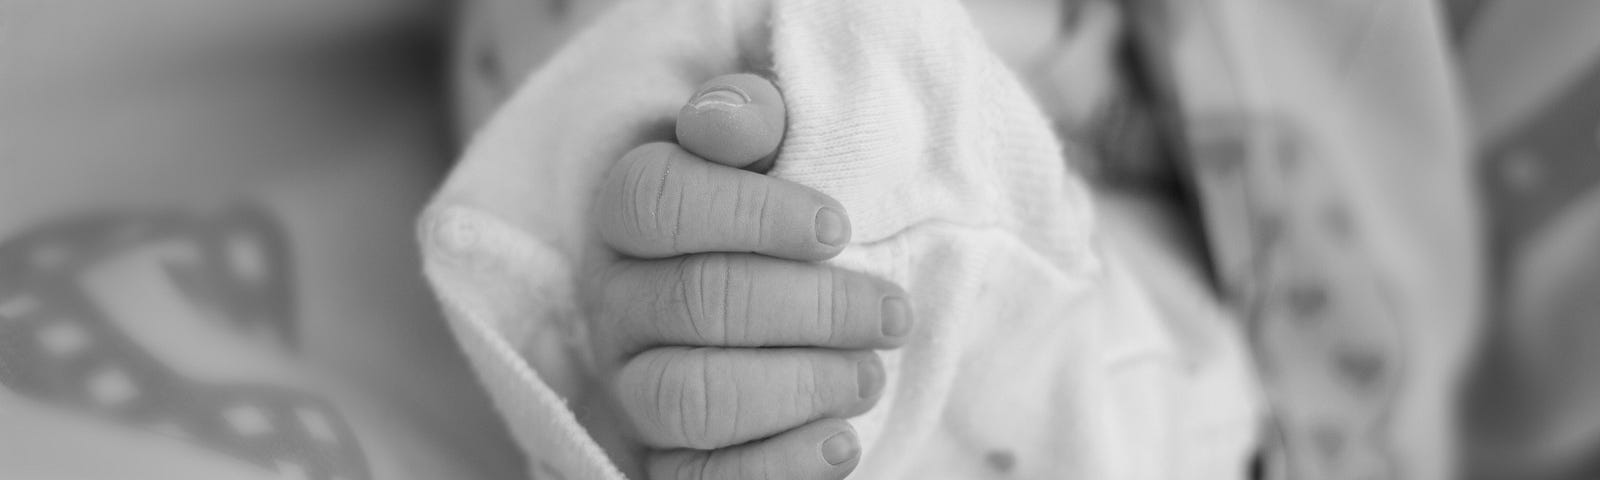 Black and white photo with closeup of an infant’s hand in an oversized sleeve. The baby’s sleeve with hand is surrounded by a blanket with non discernable pattern in gray tones.